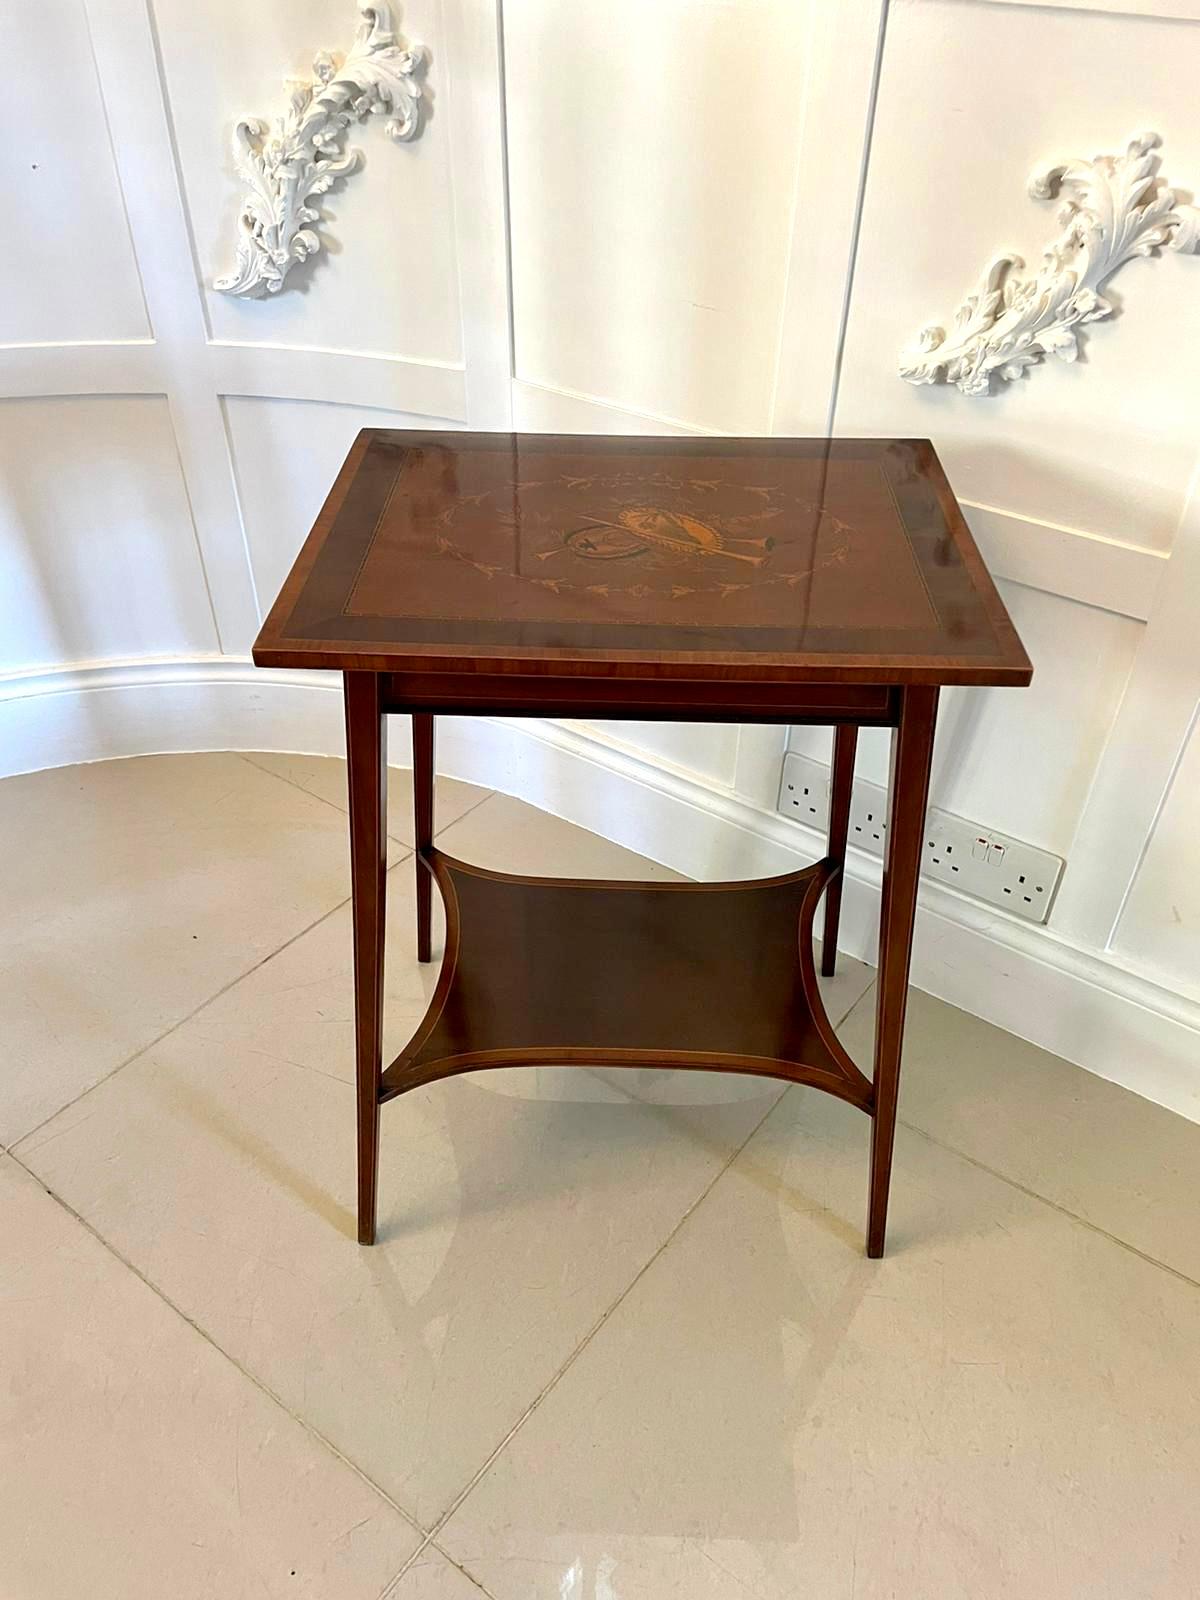 Fine quality antique Edwardian mahogany inlaid lamp table having a fine quality mahogany marquetry inlaid rectangular shaped crossbanded top, mahogany frieze and standing on four square mahogany inlaid tapering legs united by a shaped mahogany